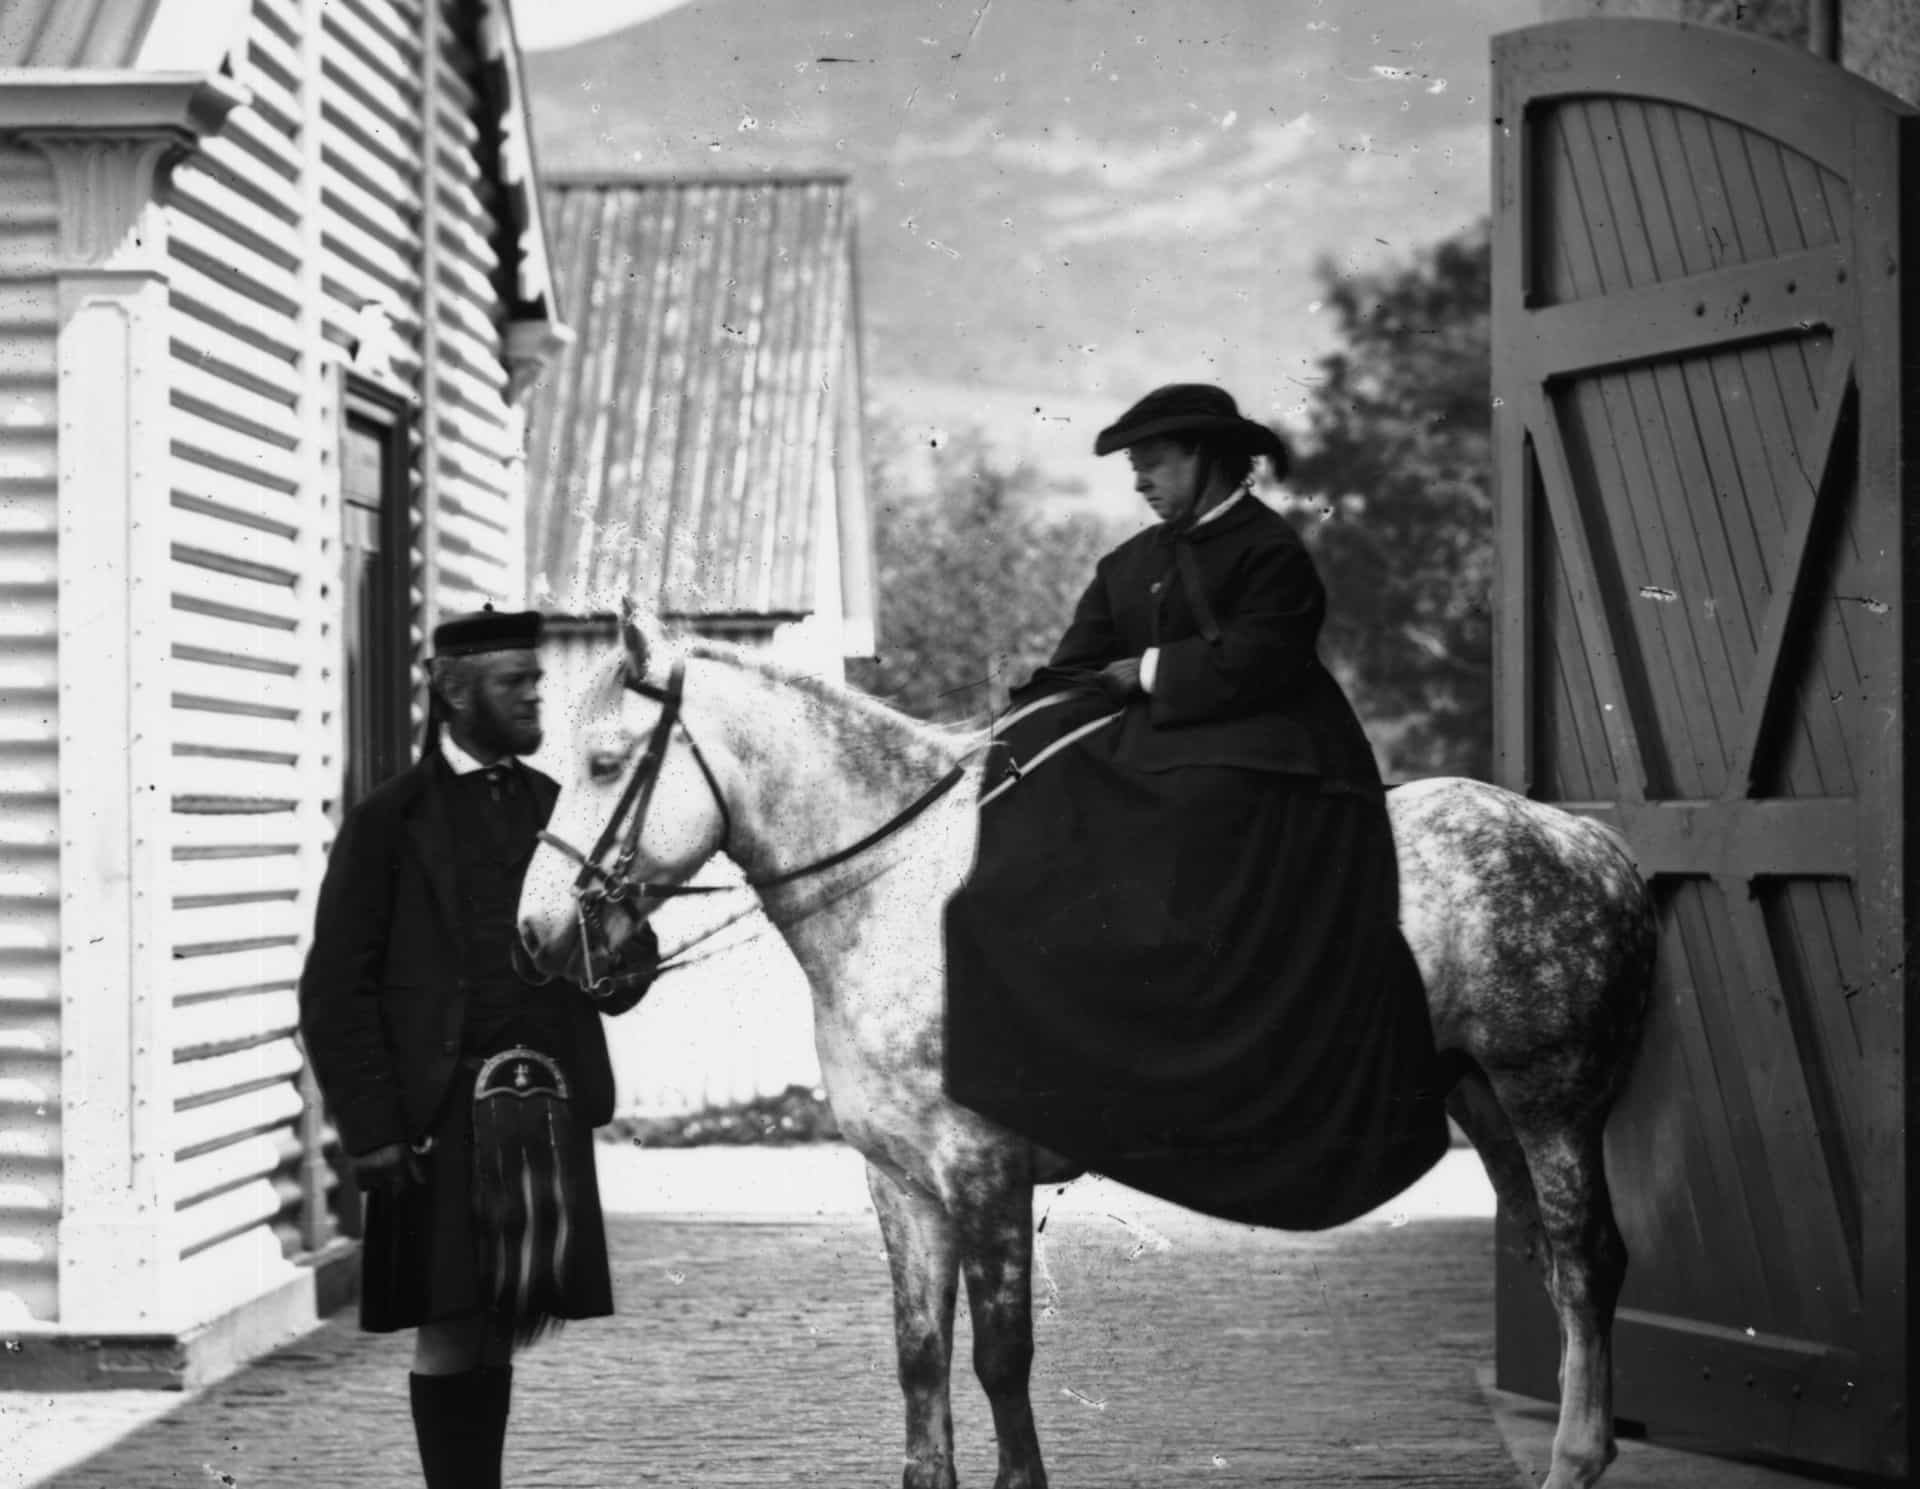 The Queen is snapped on a horse, ready for a ride at Balmoral. She’s accompanied by her personal assistant, John Brown.